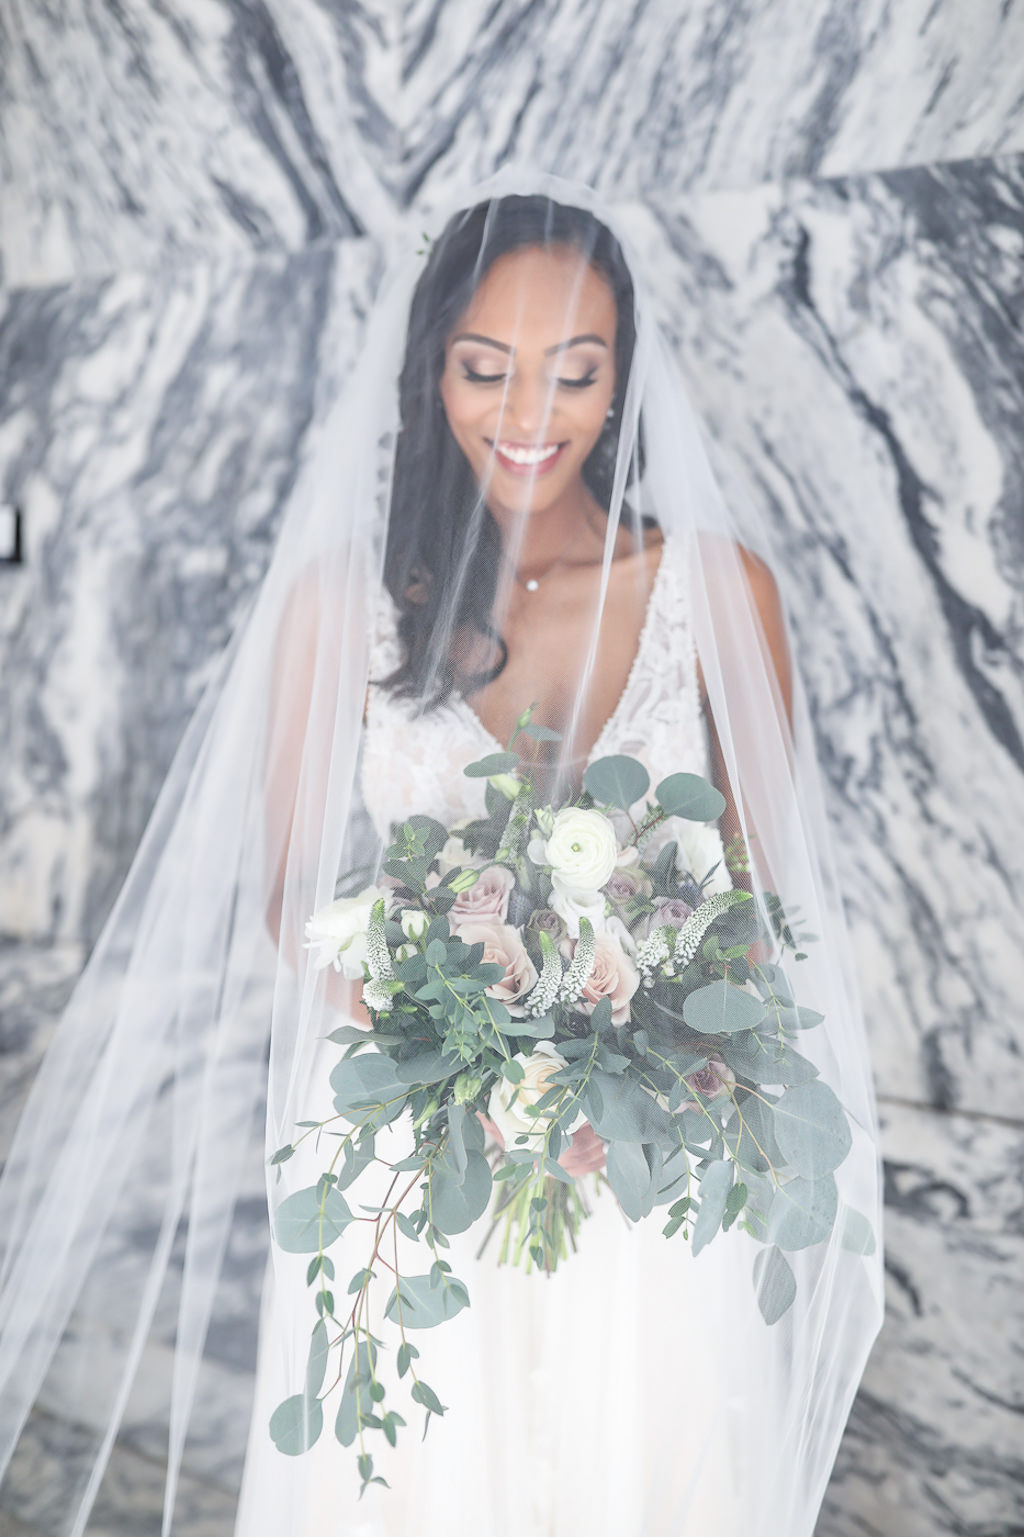 Florida Boho Chic Bride in Plunging V Neckline Lace and Tulle Skirt Wedding Dress with Cathedral Length Veil Over Face Holding Organic Silver Dollar Eucalyptus, White and Blush Pink Rose Floral Bridal Bouquet Wedding Portrait | Tampa Bay Wedding Photographer Lifelong Photography Studio | Wedding Hair and Makeup Femme Akoi Beauty Studio